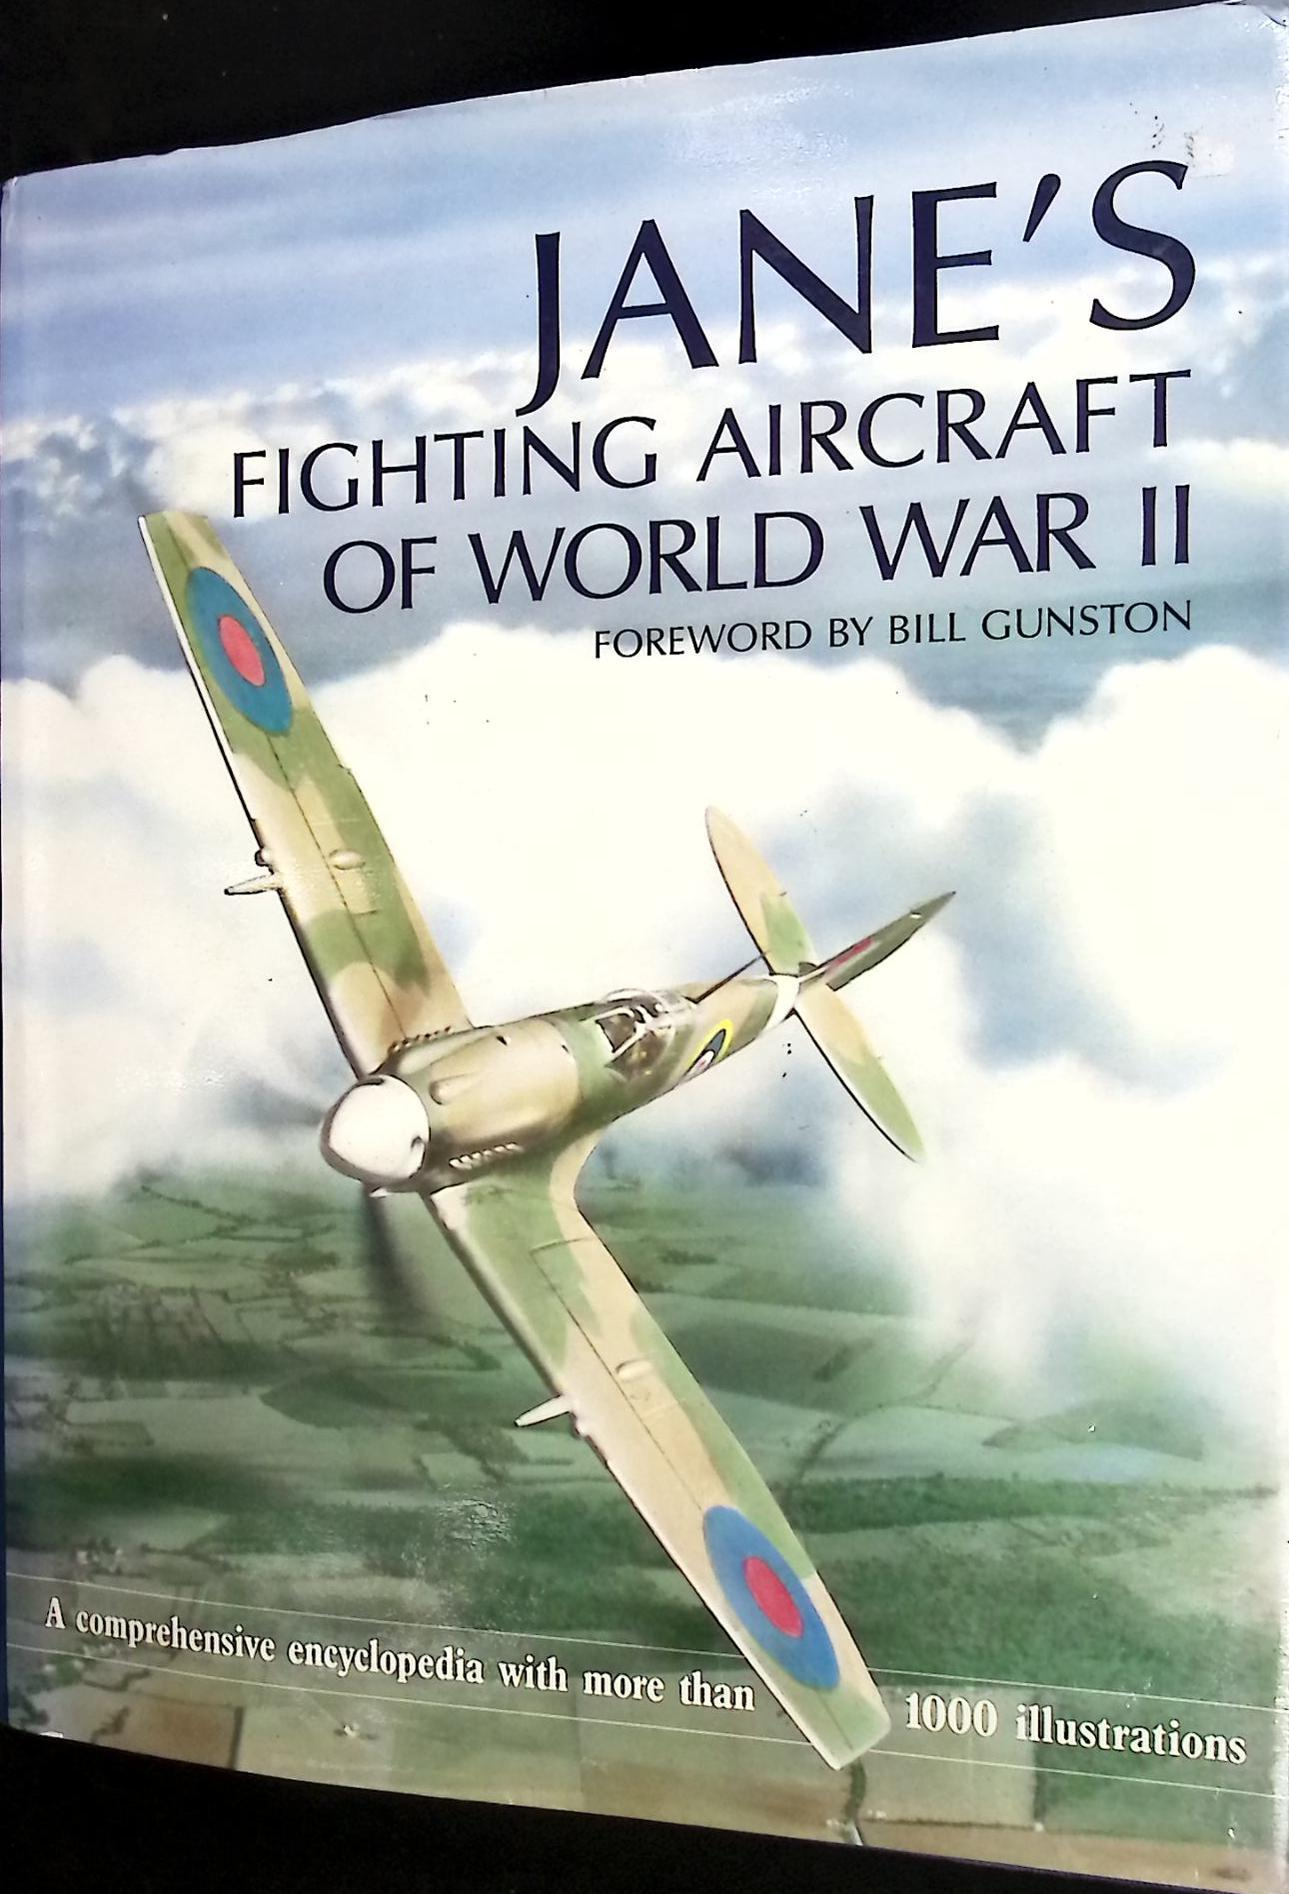 Jane's Fighting Aircraft of World War II. Facsimile edition.